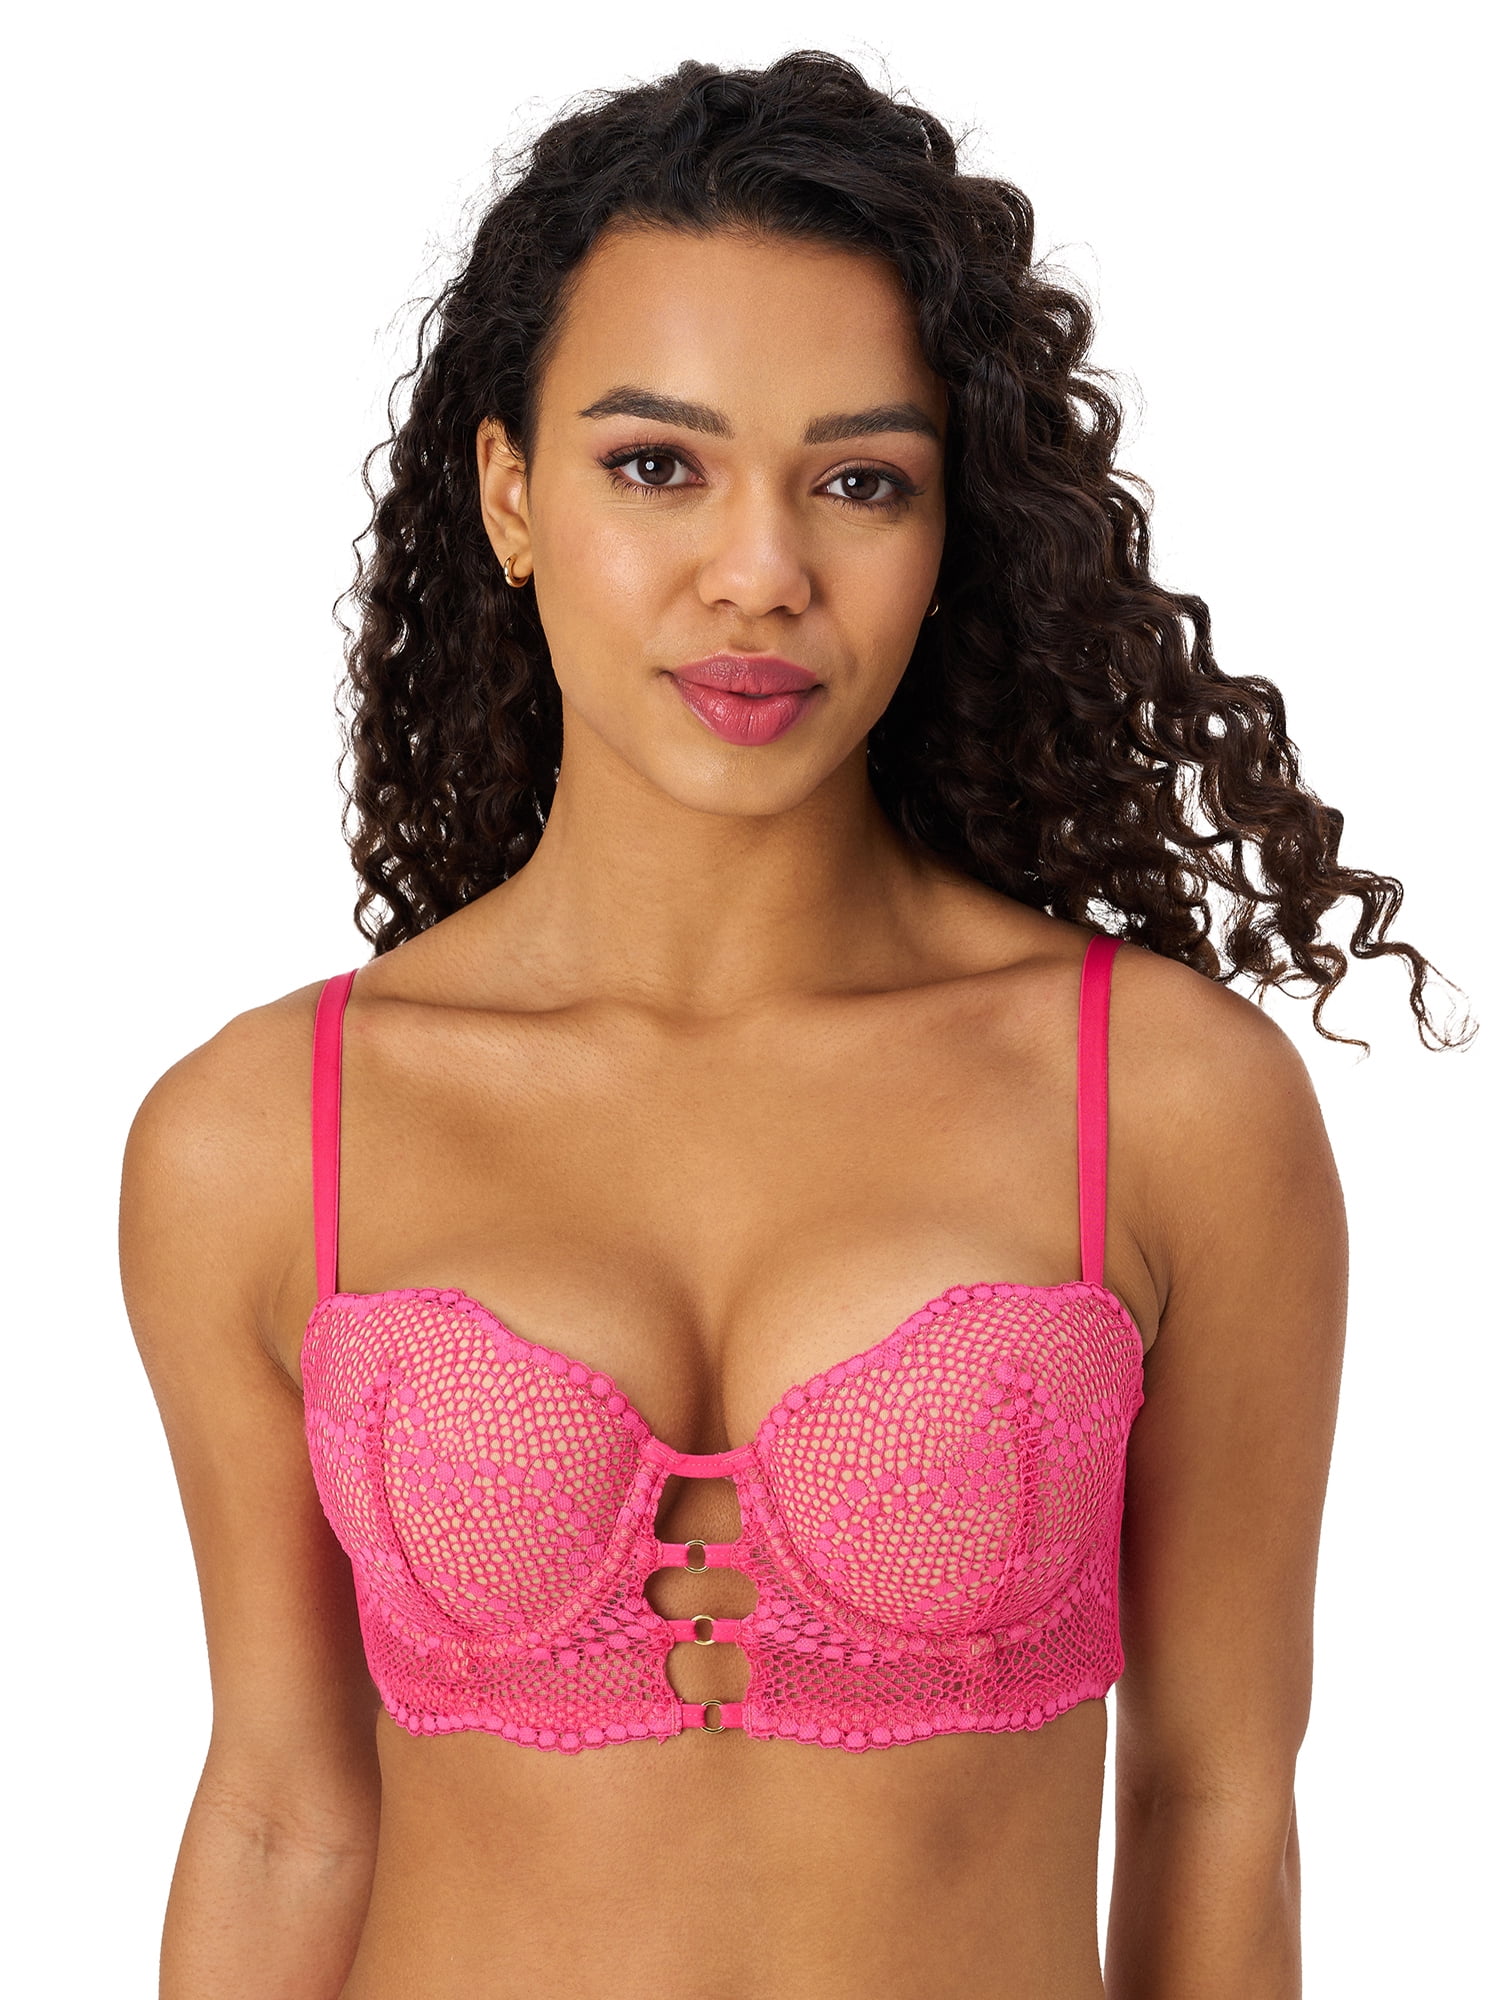 Adored by Adore Me Women’s Morgan Natural Lift Lace Push Up Bra, Sizes  32B-40DD